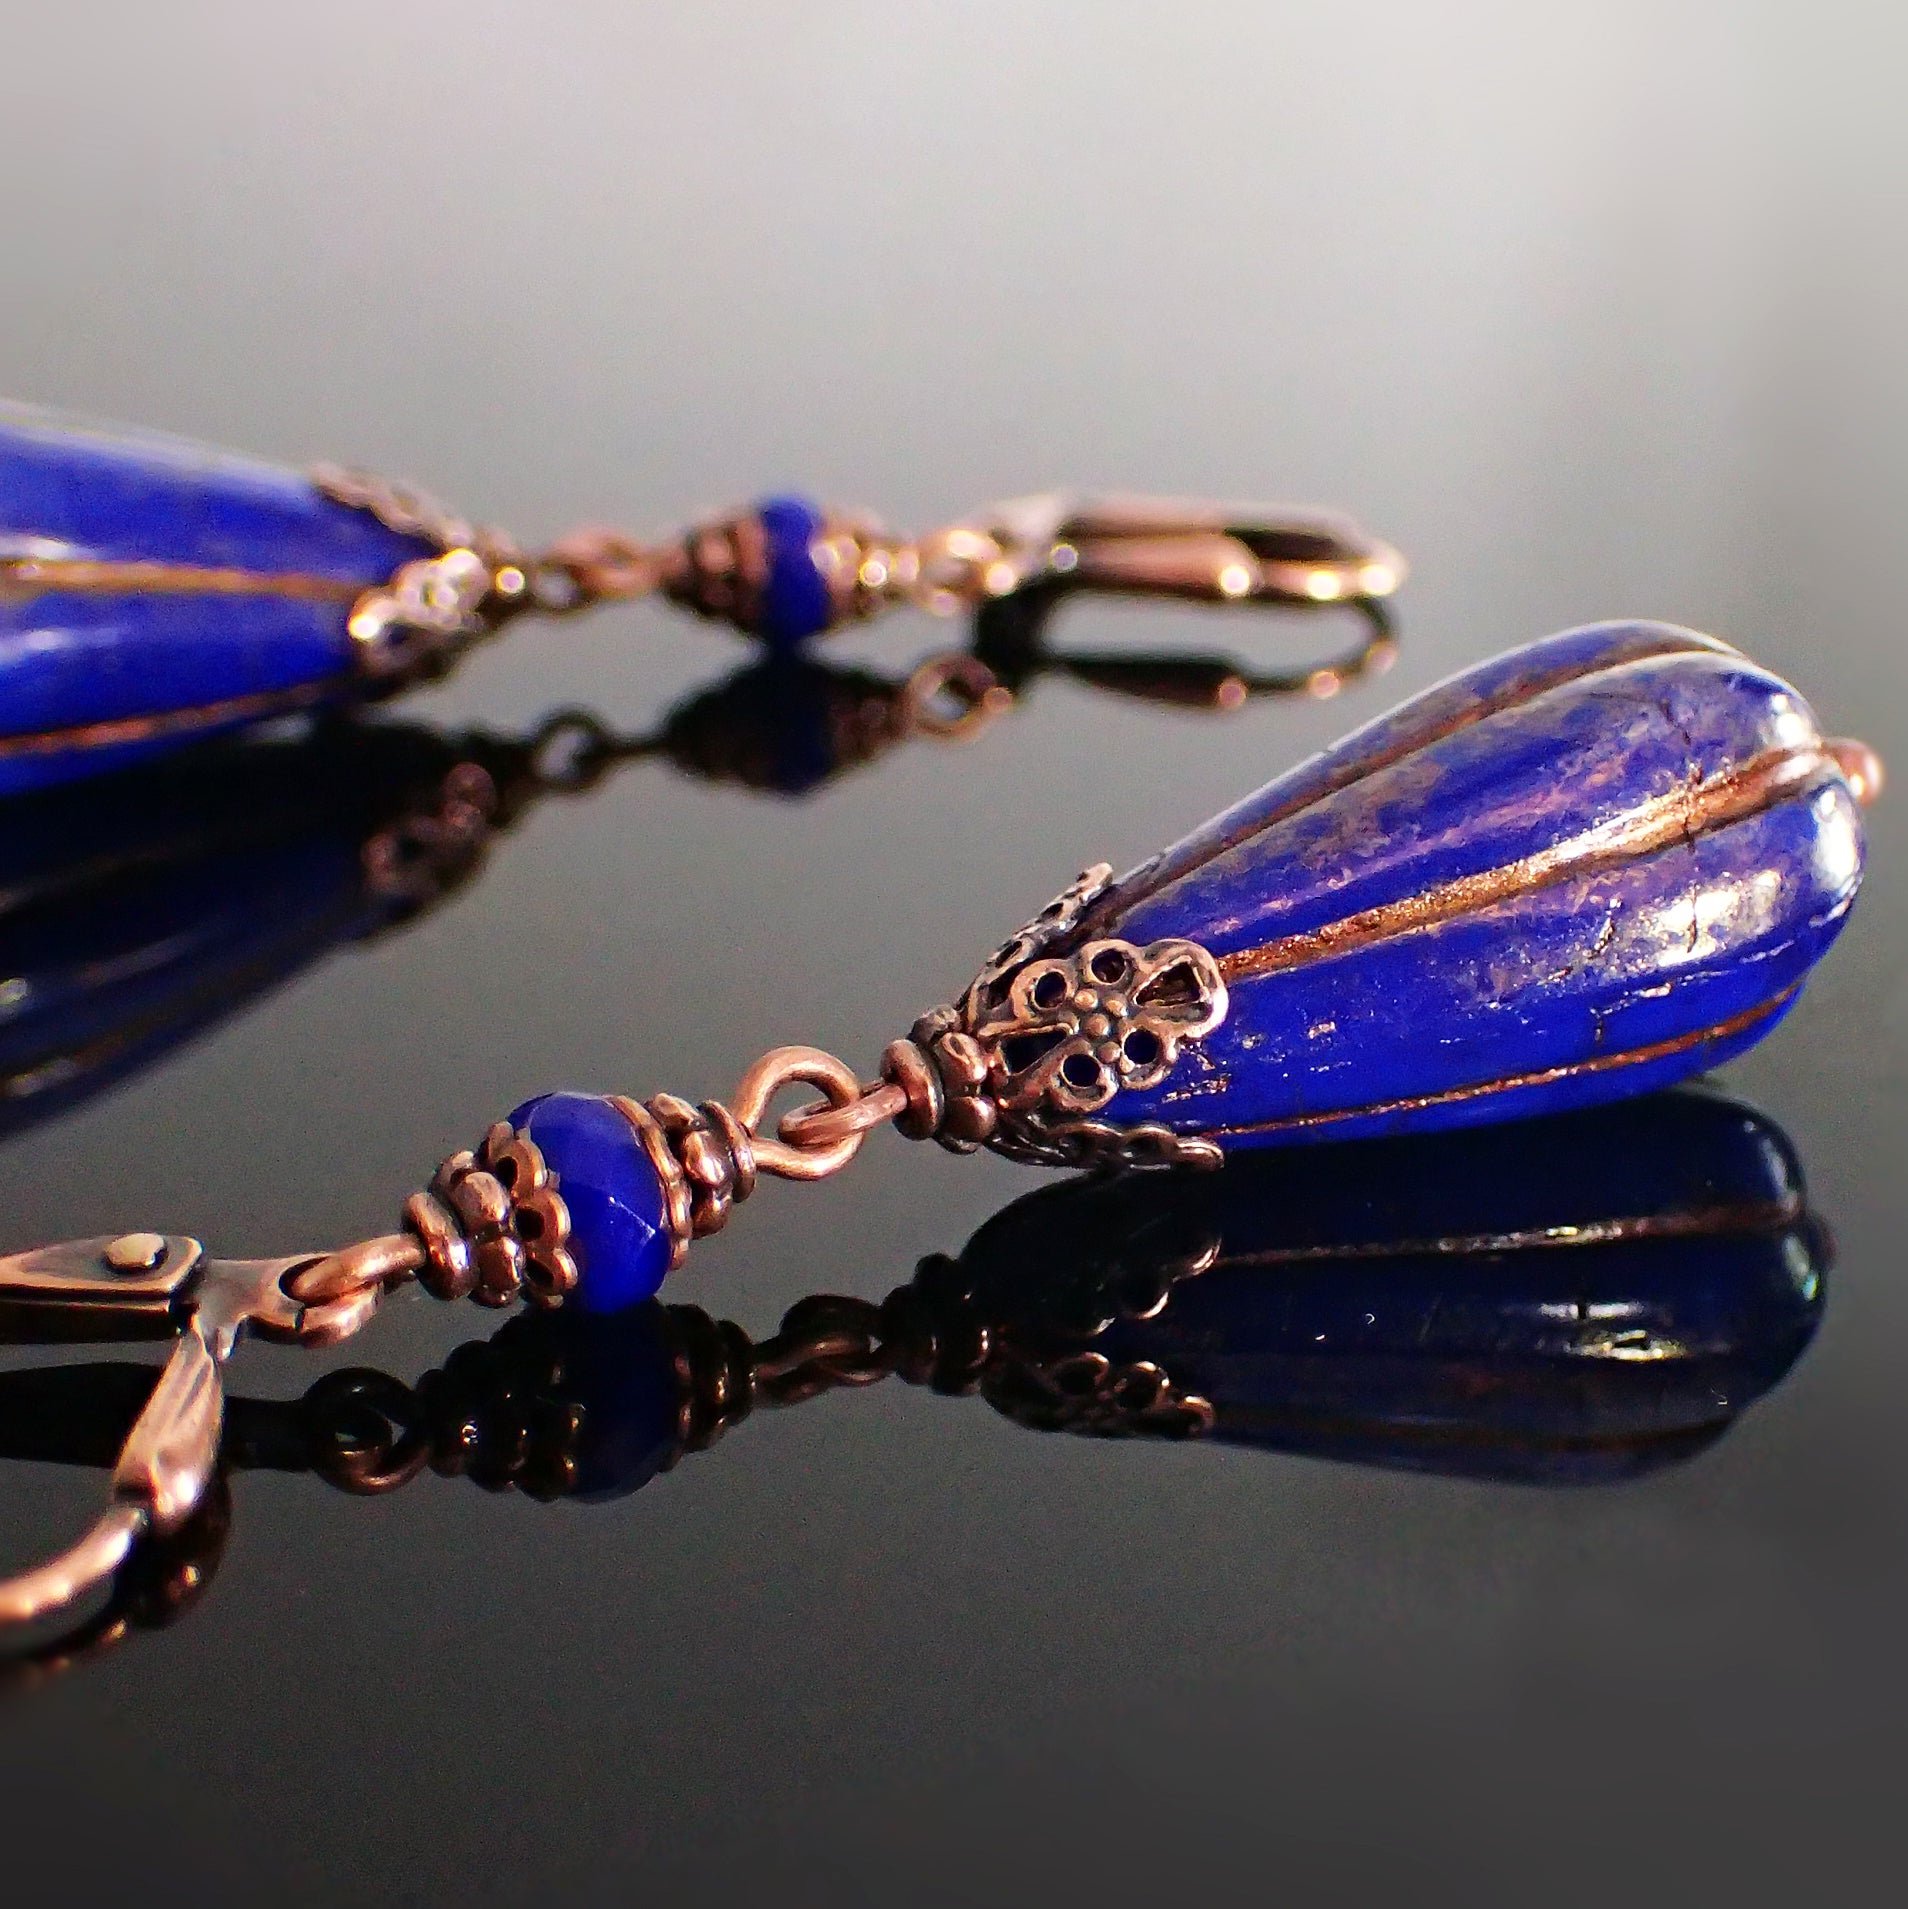 Cobalt Royal Blue and Antiqued Copper Victorian Style Teardrop Bead Earrings